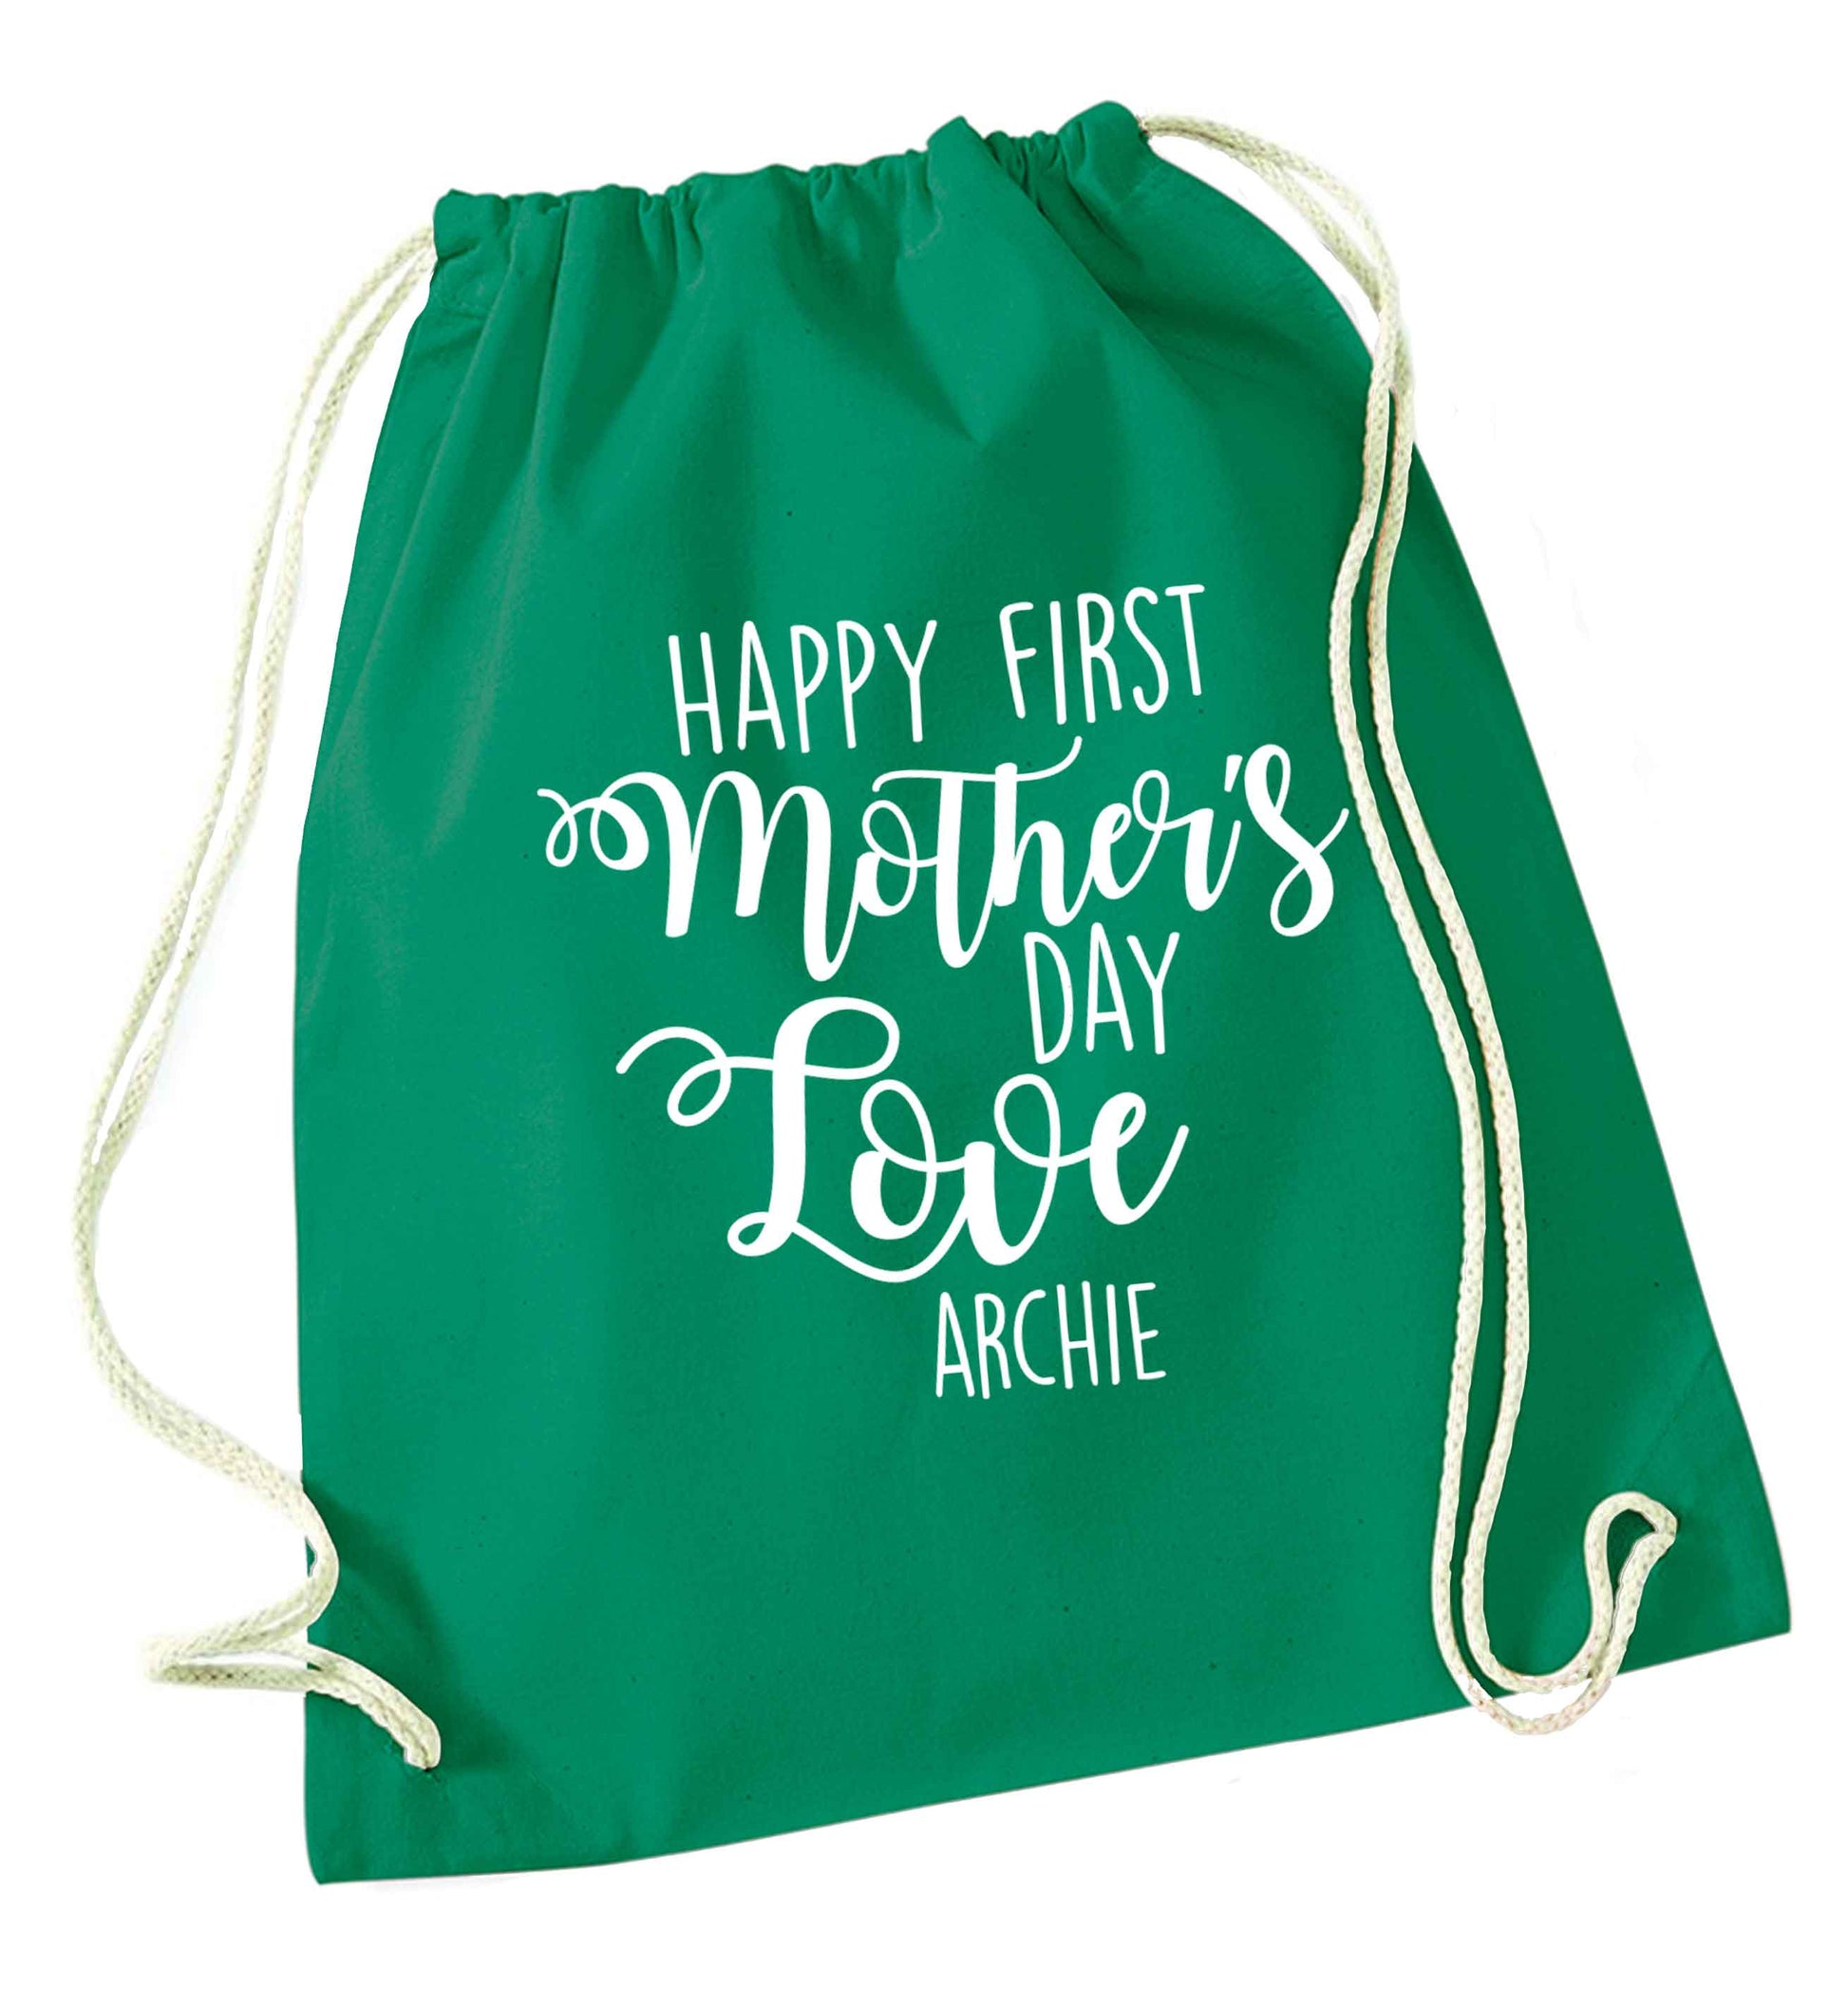 Mummy's first mother's day! green drawstring bag